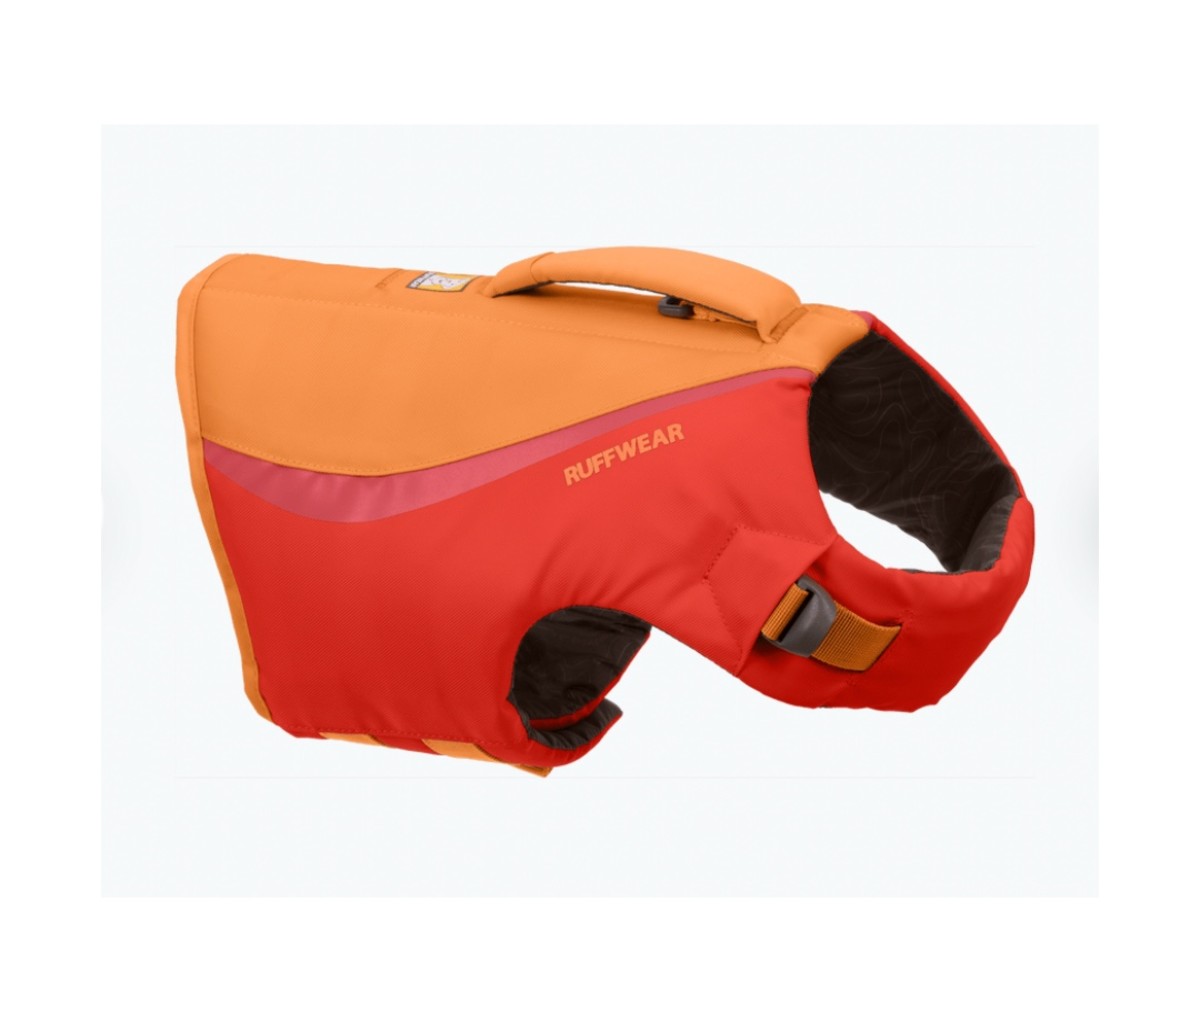 The Ruffwear Floating Coat will allow your dog to swim high and have fun in the water.